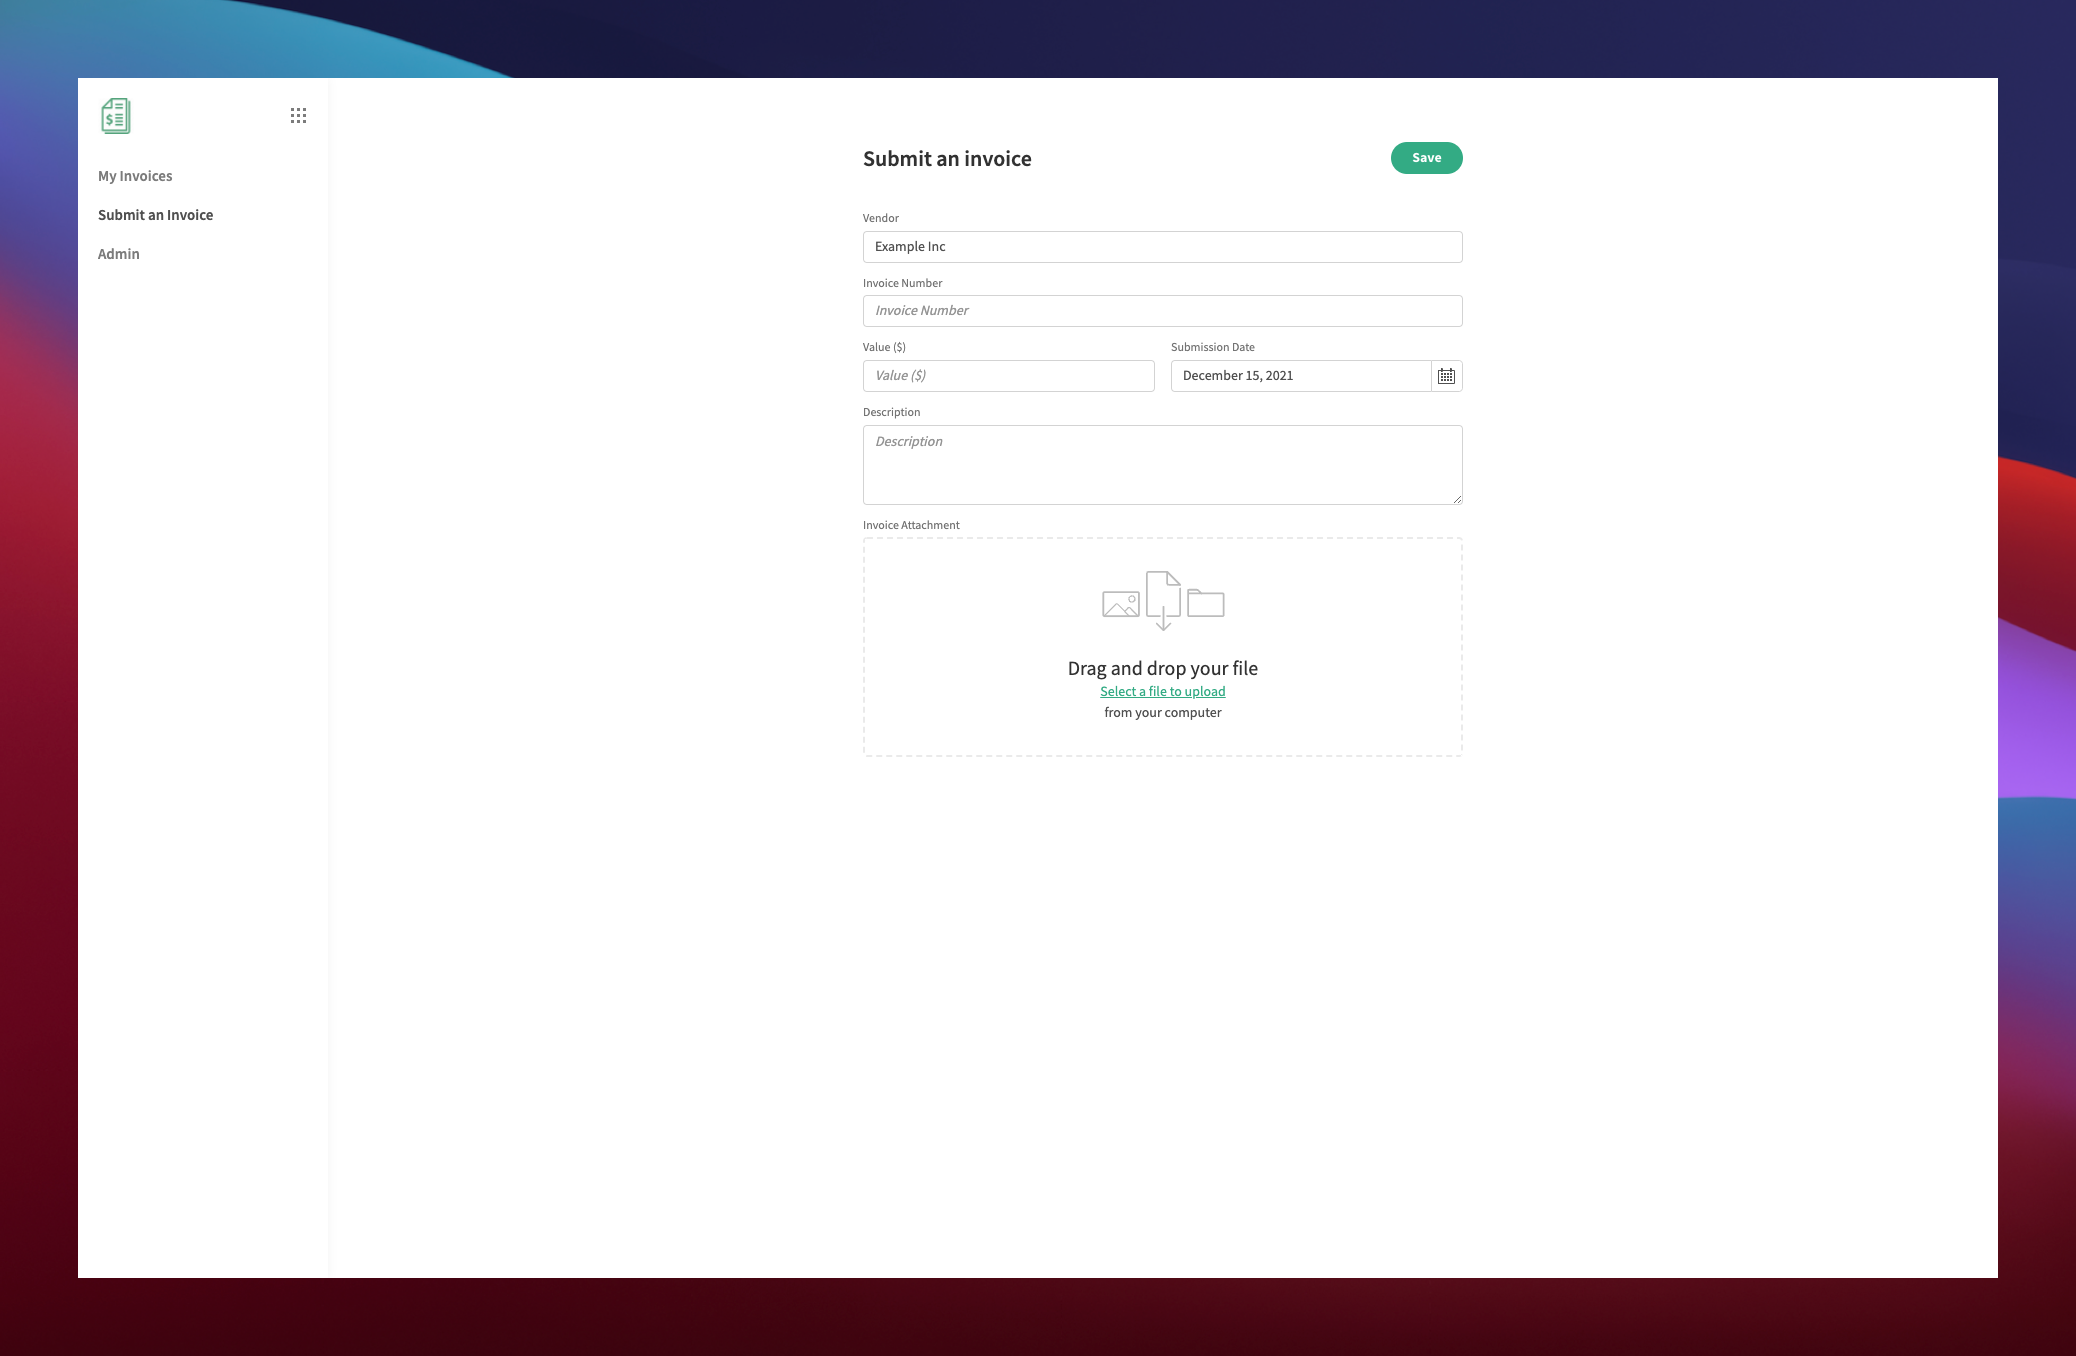 Invoice Approval Software - Submission Screen